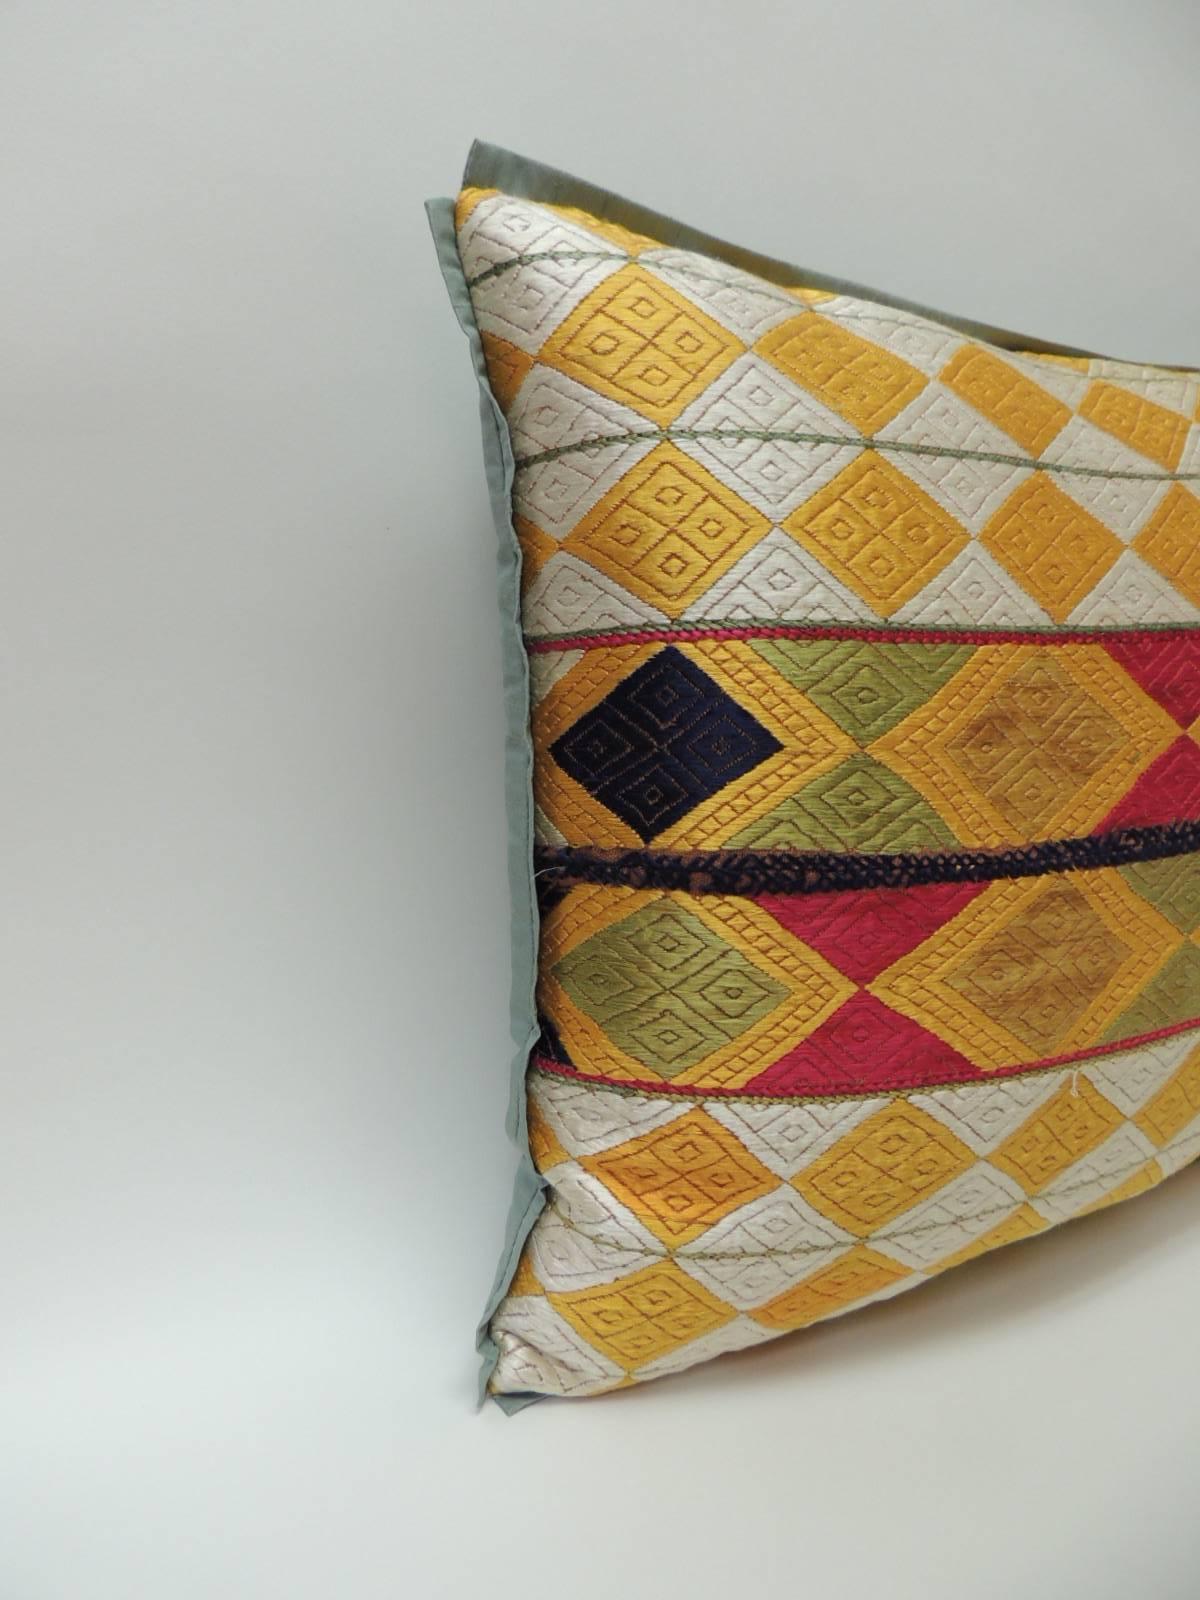 Pair of Indian 19th century “Phulkari” Artisanal decorative bolster pillow
The front pattern is made of silk embroidered diamonds with a colorful band of larger diamonds in the center creating a striped design of larger diamonds across the front